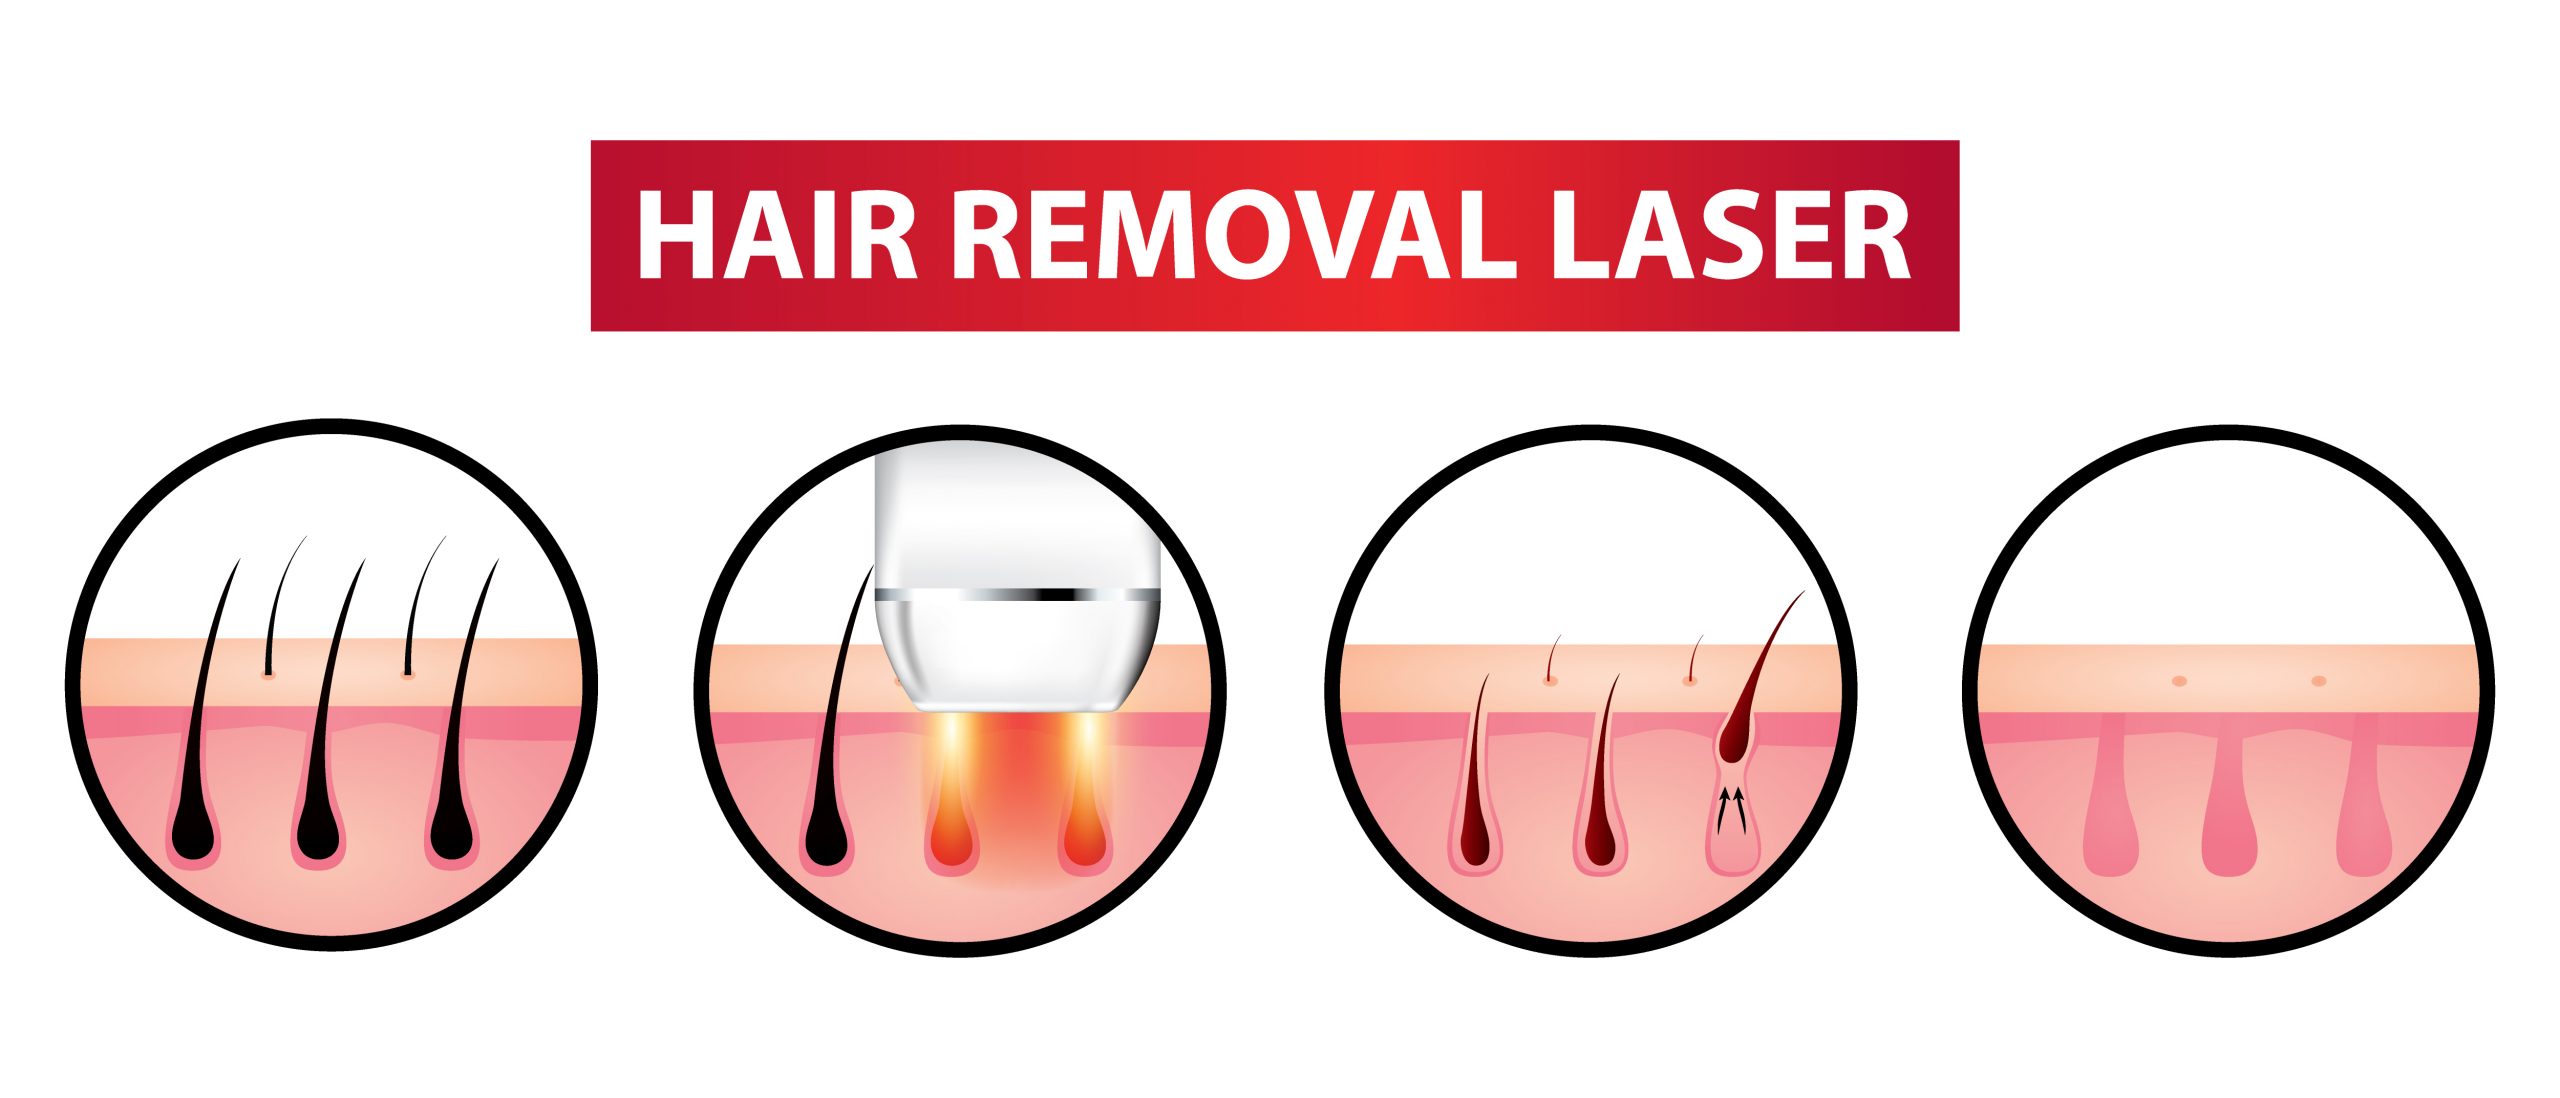 Laser Hair Removal: Procedure, Benefits, Side Effects, Results And FAQs